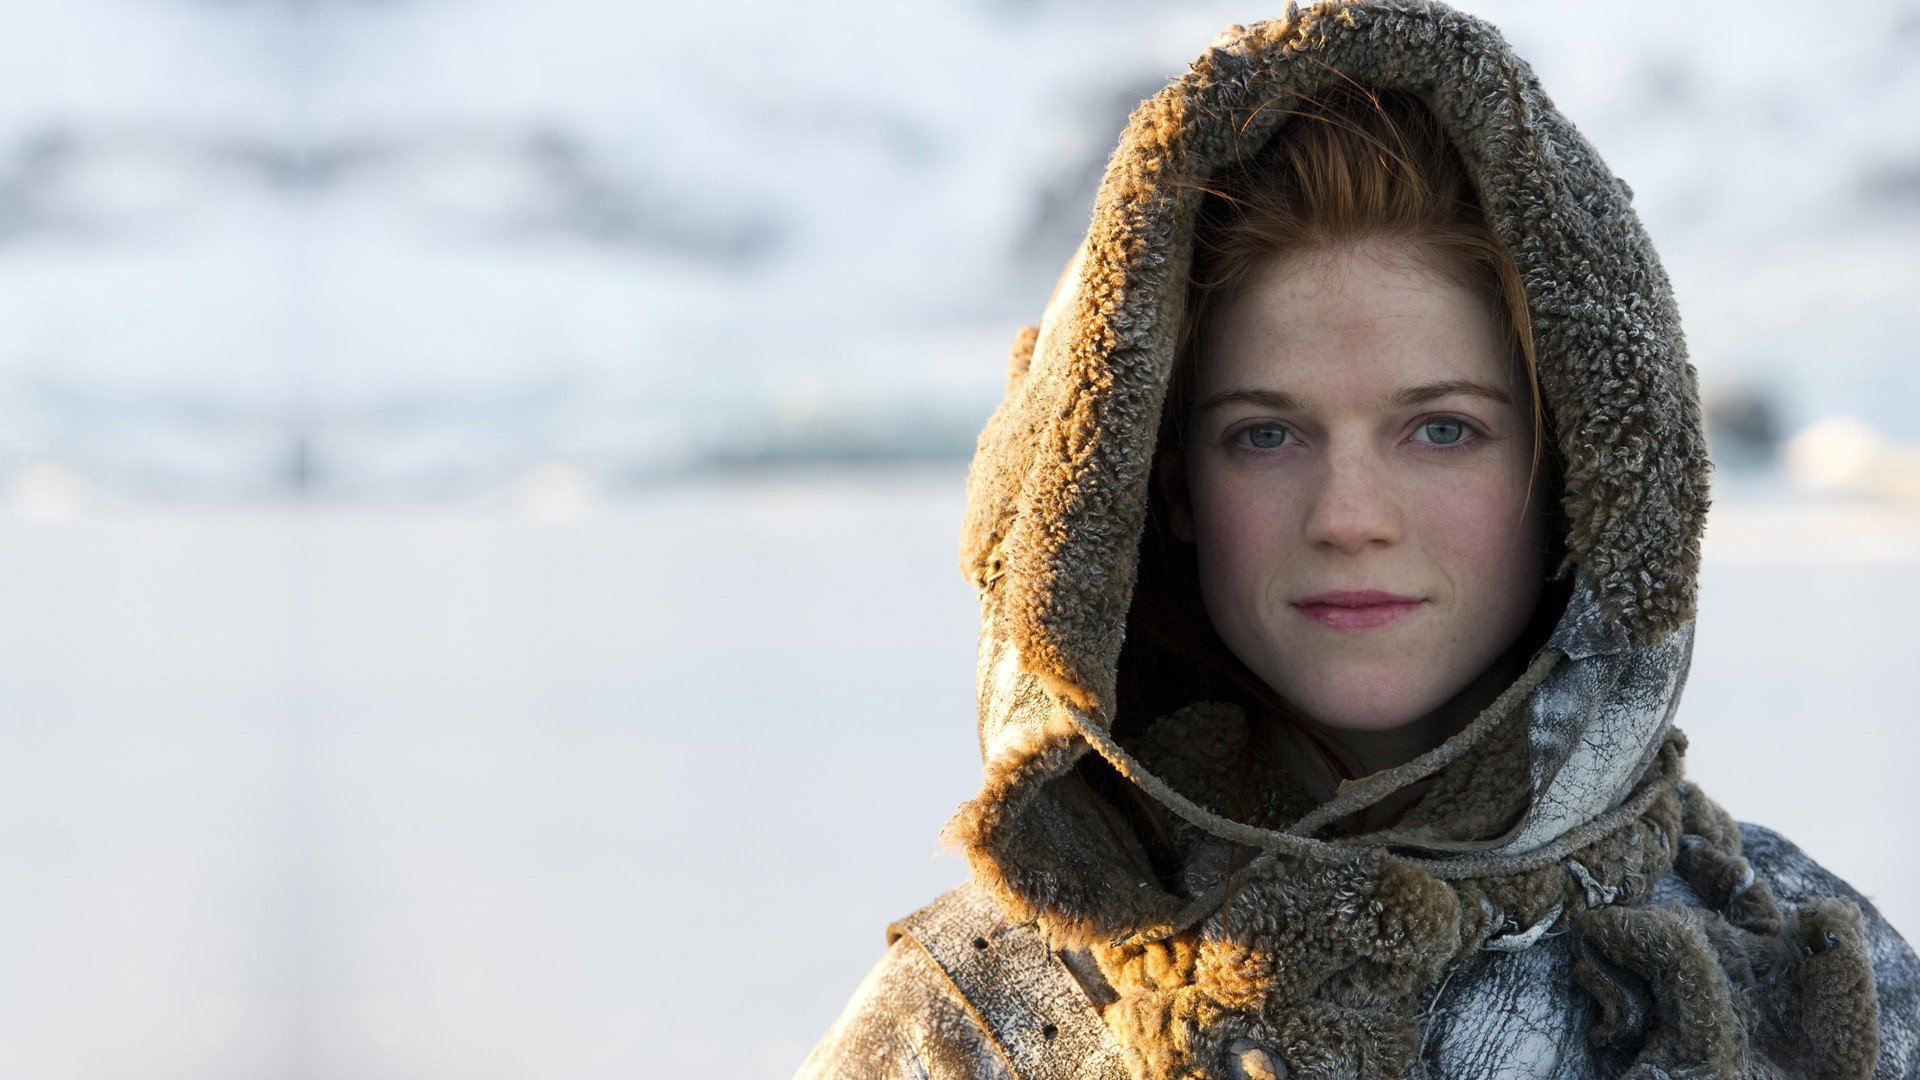 Game Of Thrones Ygritte Wallpaper Hd Wallpaper For Desktop And Gadget ...